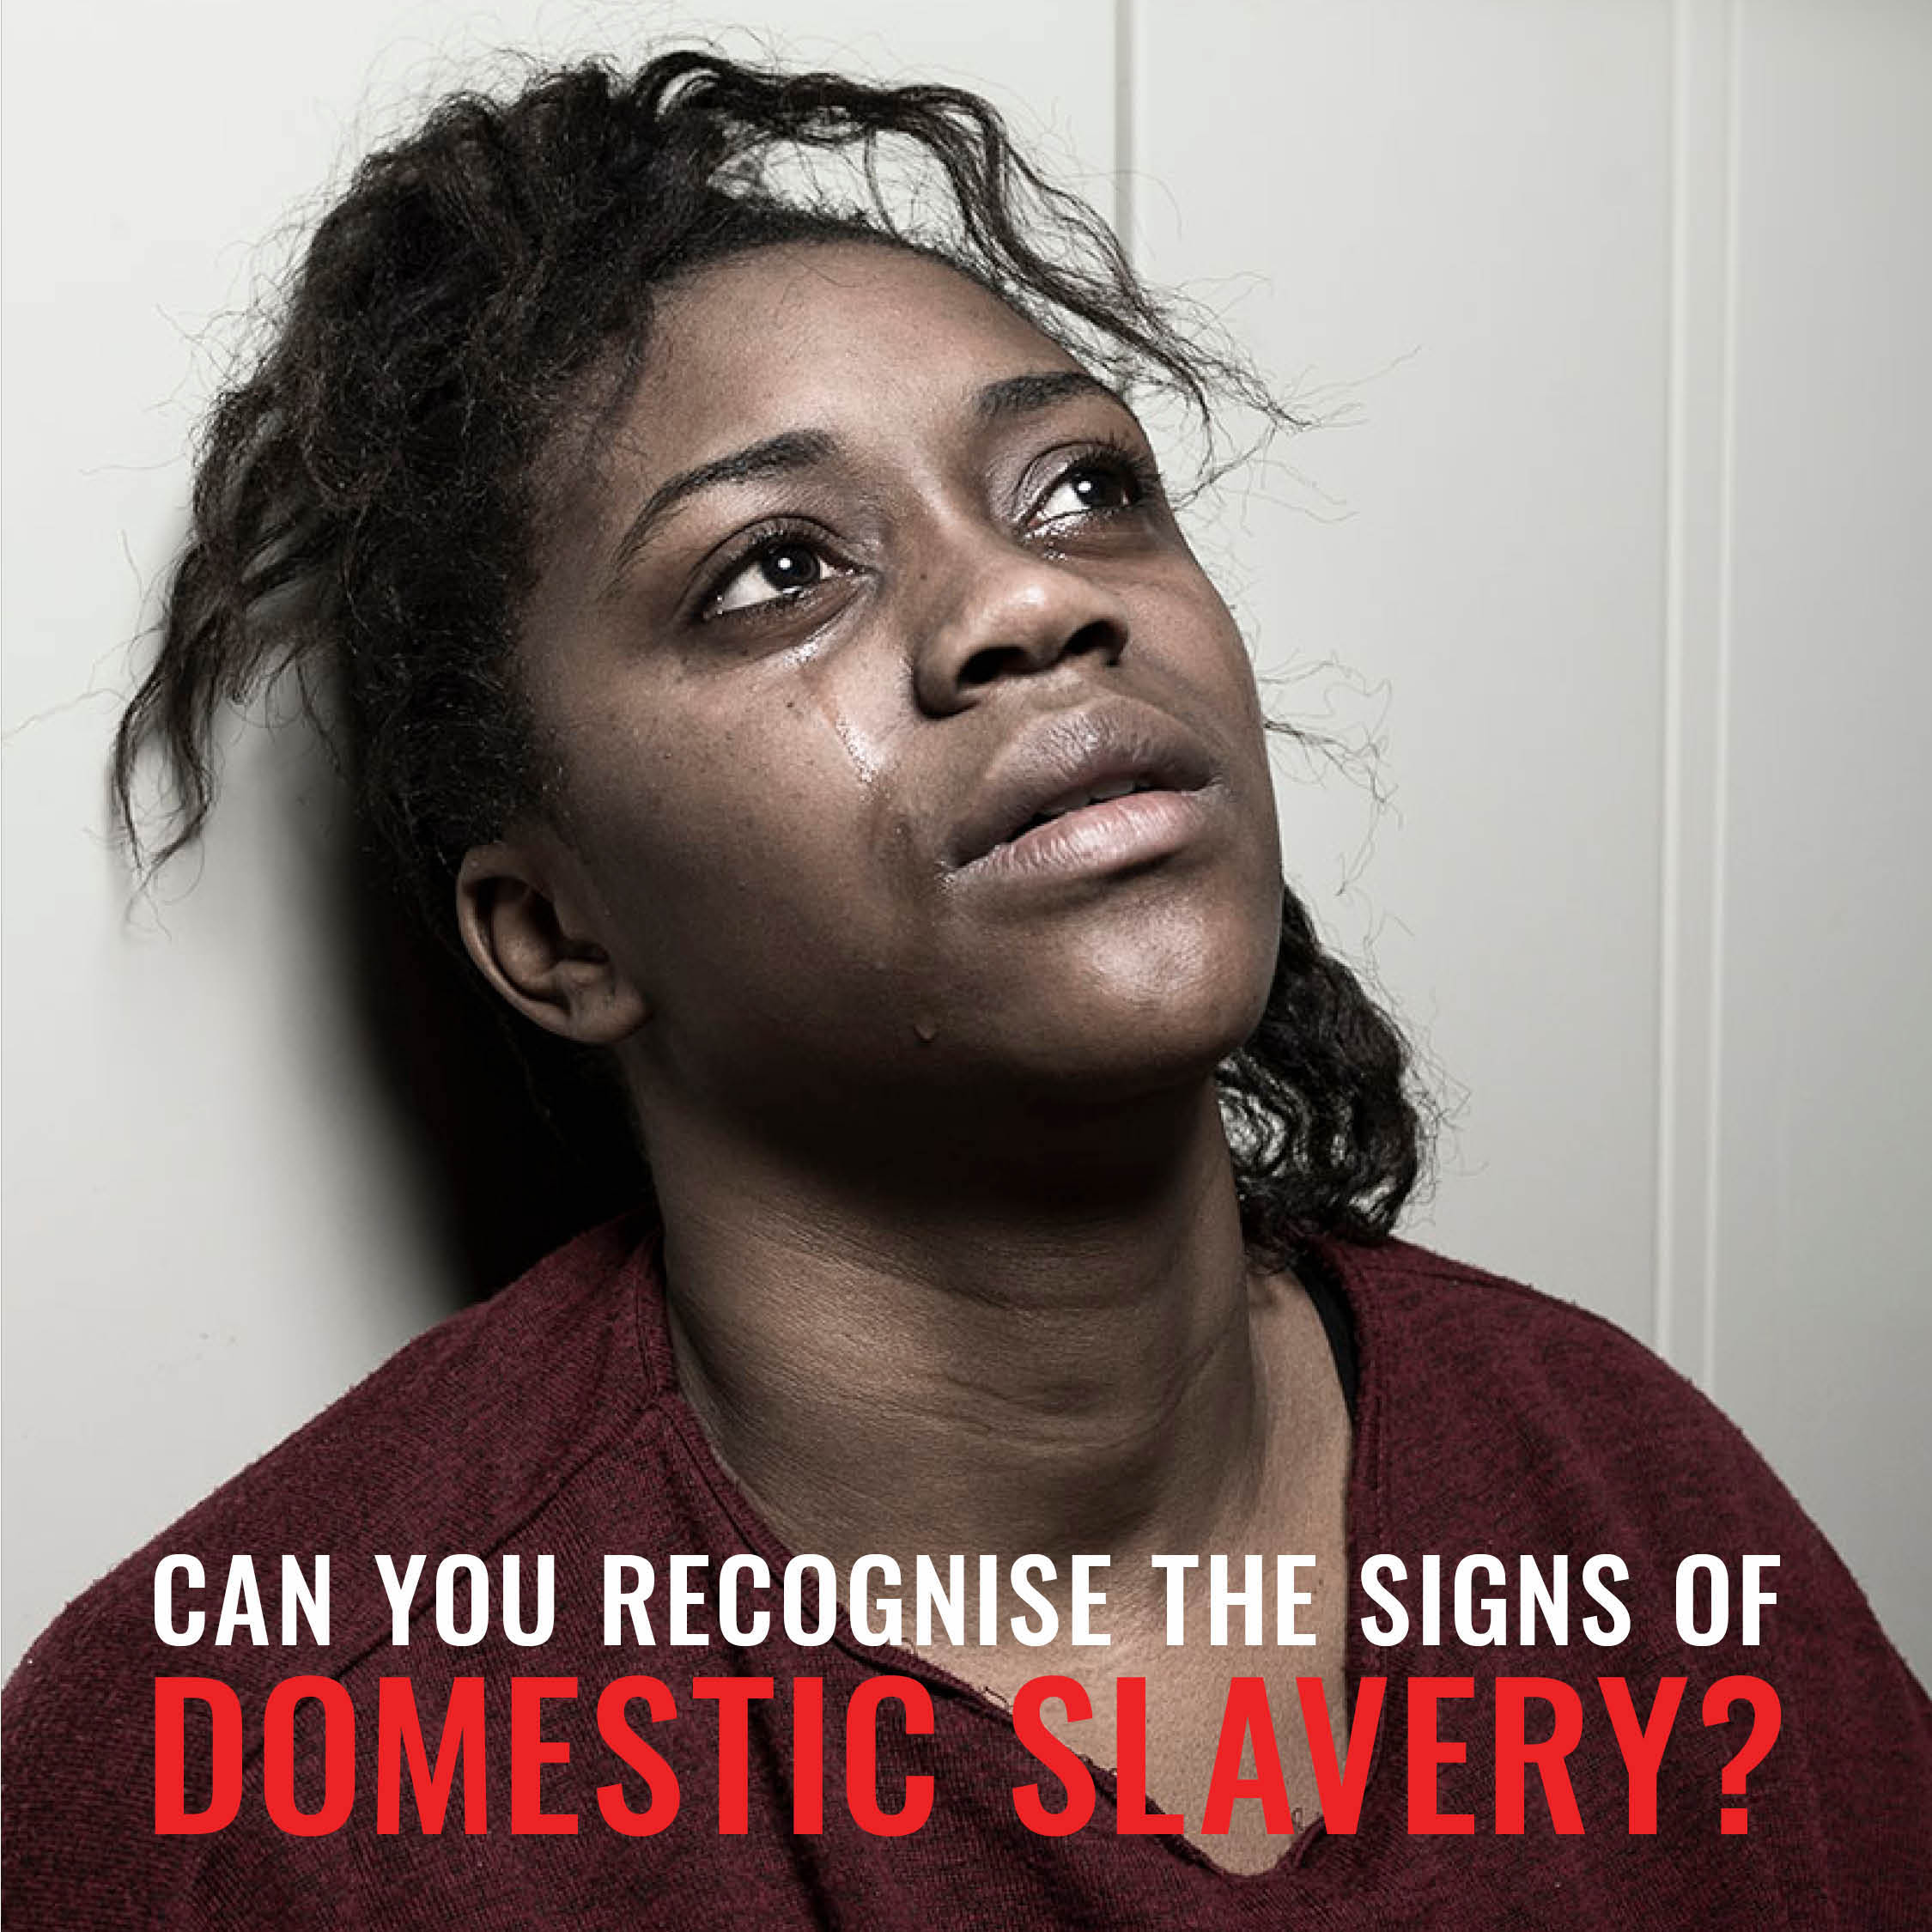 Nigerian community urged to ‘Spot the Signs’ of Domestic Slavery